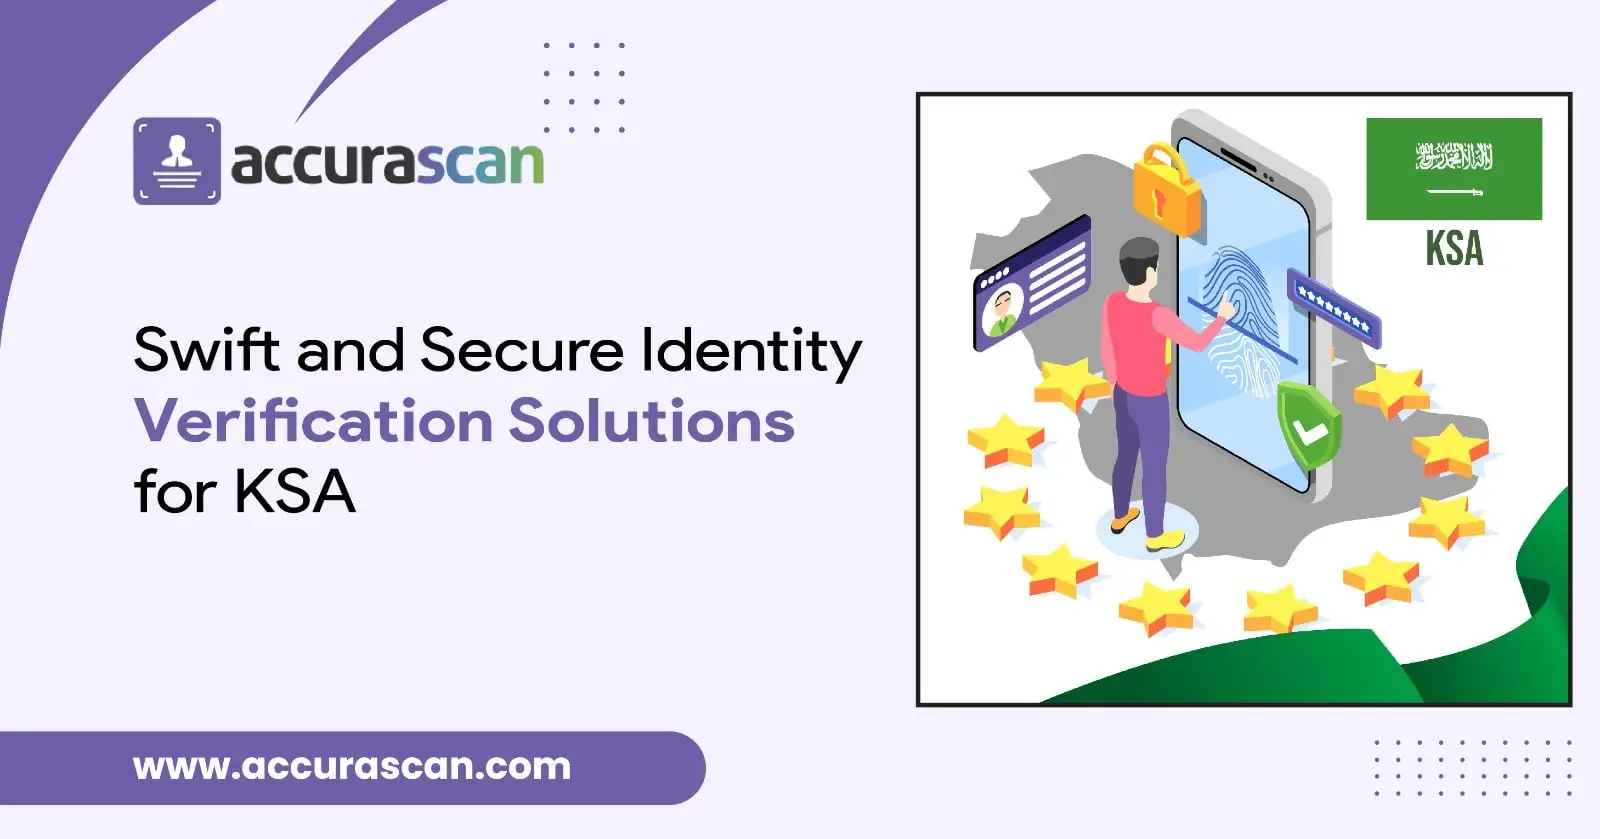 Swift and Secure Identity Verification Solutions for KSA